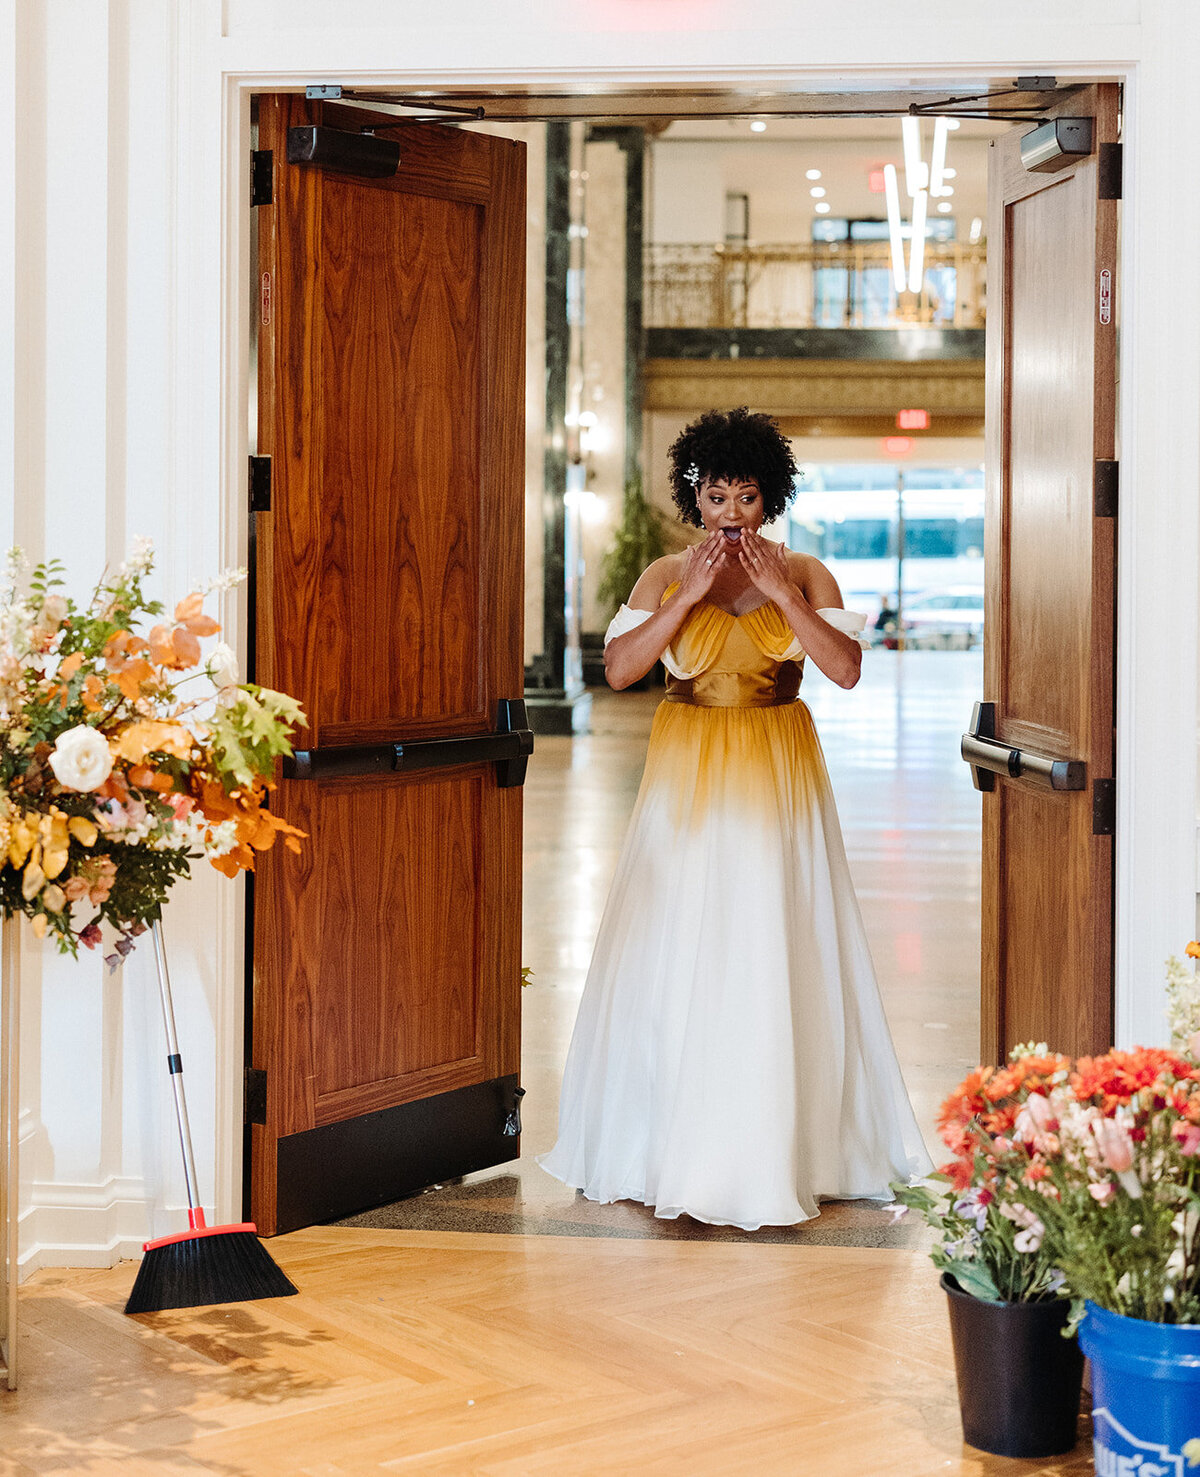 Autumnal beauty covers this Parisian inspired wedding in florals composed of roses, lisianthus, ranunculus clematis, copper beach, raintree pods, mums, and fall foliage creating rich hues of dusty rose, terra cotta, burgundy, lavender, and copper. Design by Rosemary and Finch in Nashville, TN.